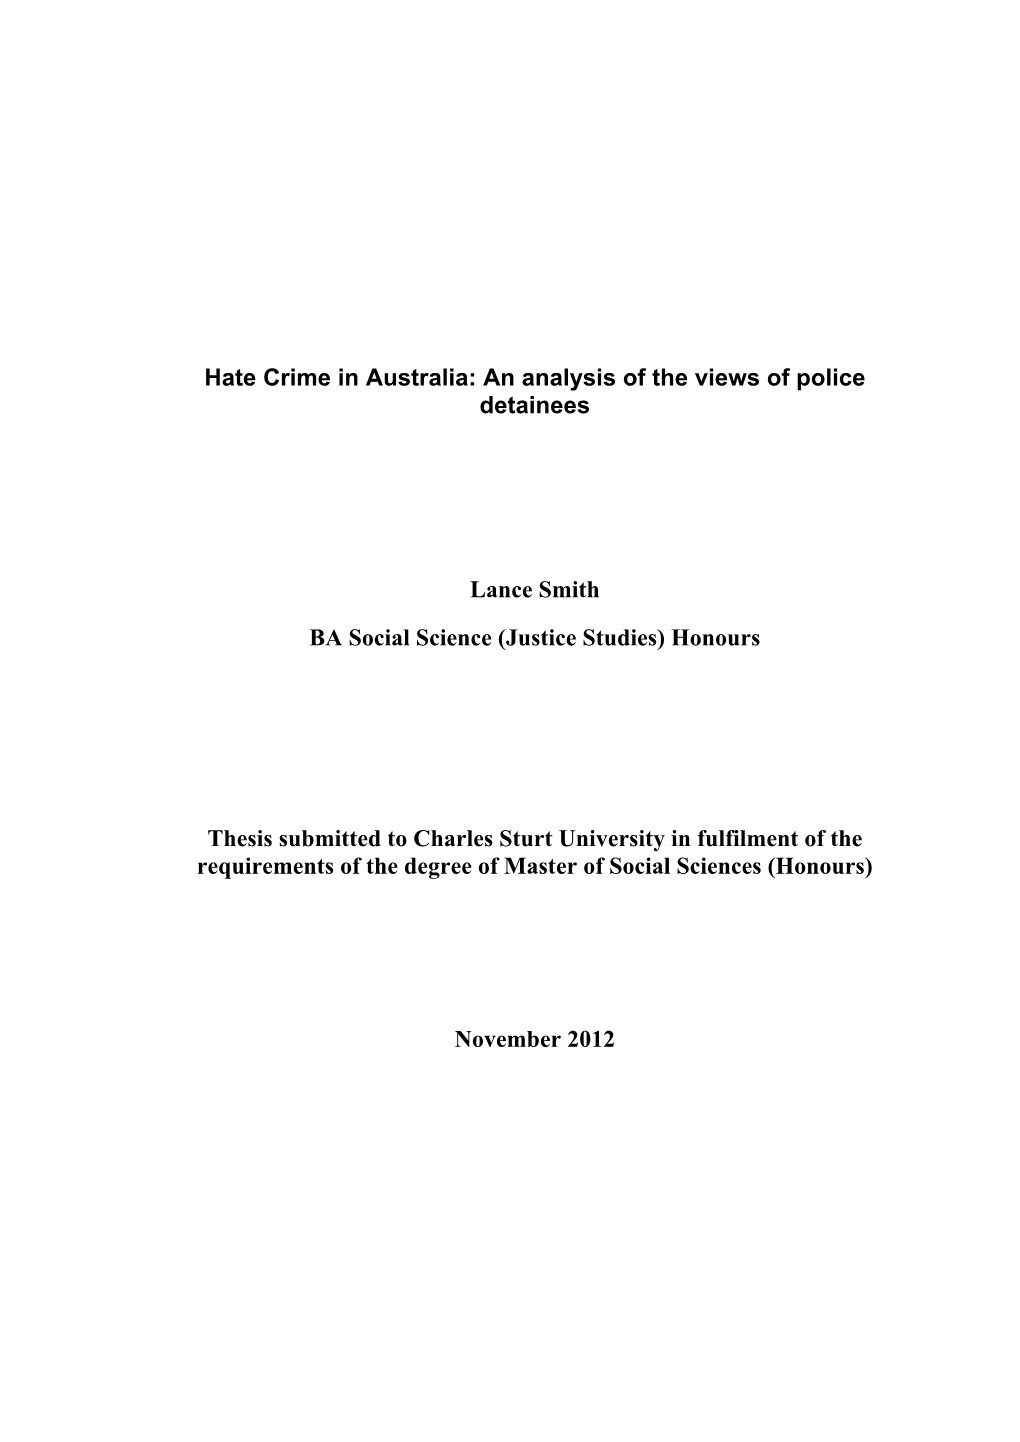 Hate Crime in Australia: an Analysis of the Views of Police Detainees